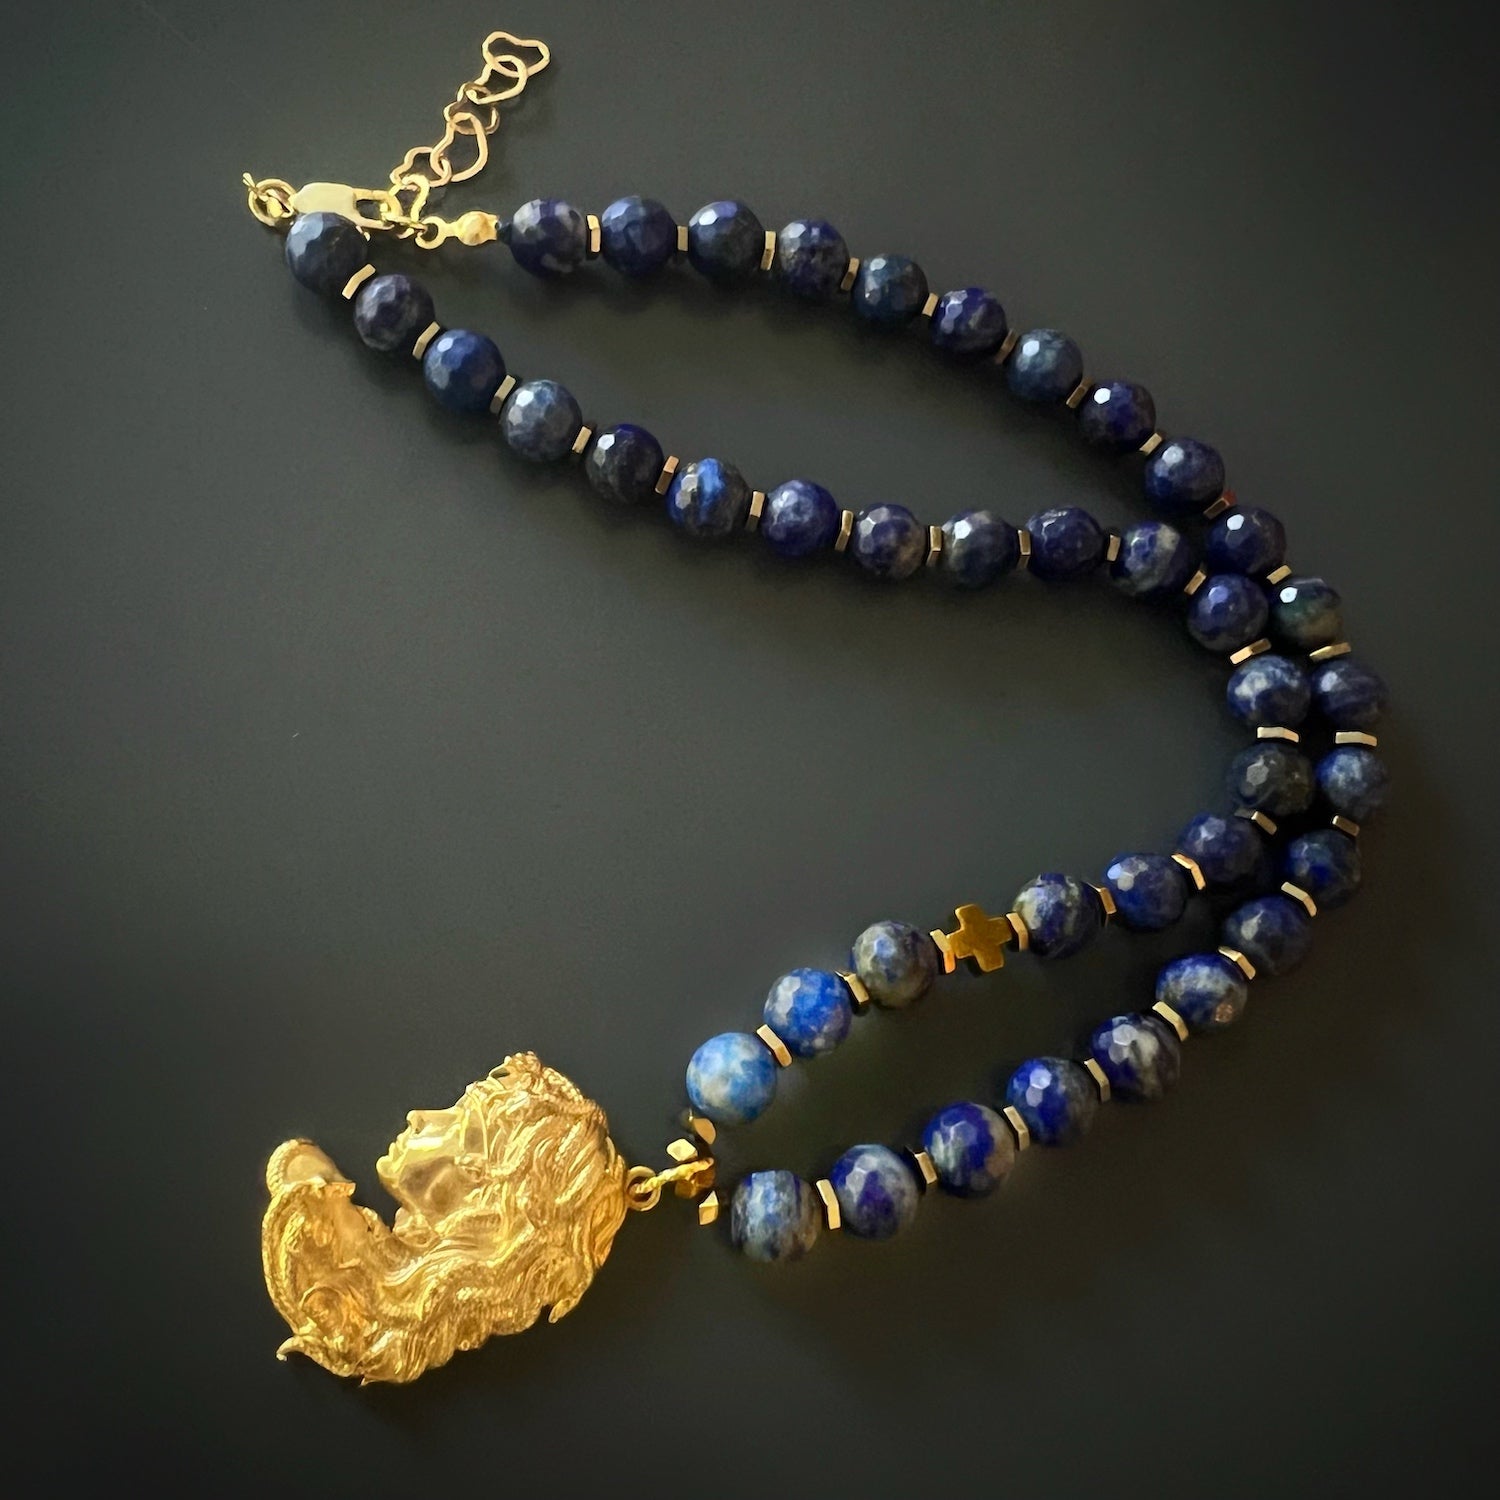 Discover the opulence of the Medusa Lapis Lazuli Necklace, adorned with gold hematite spacers and a captivating handmade pendant.